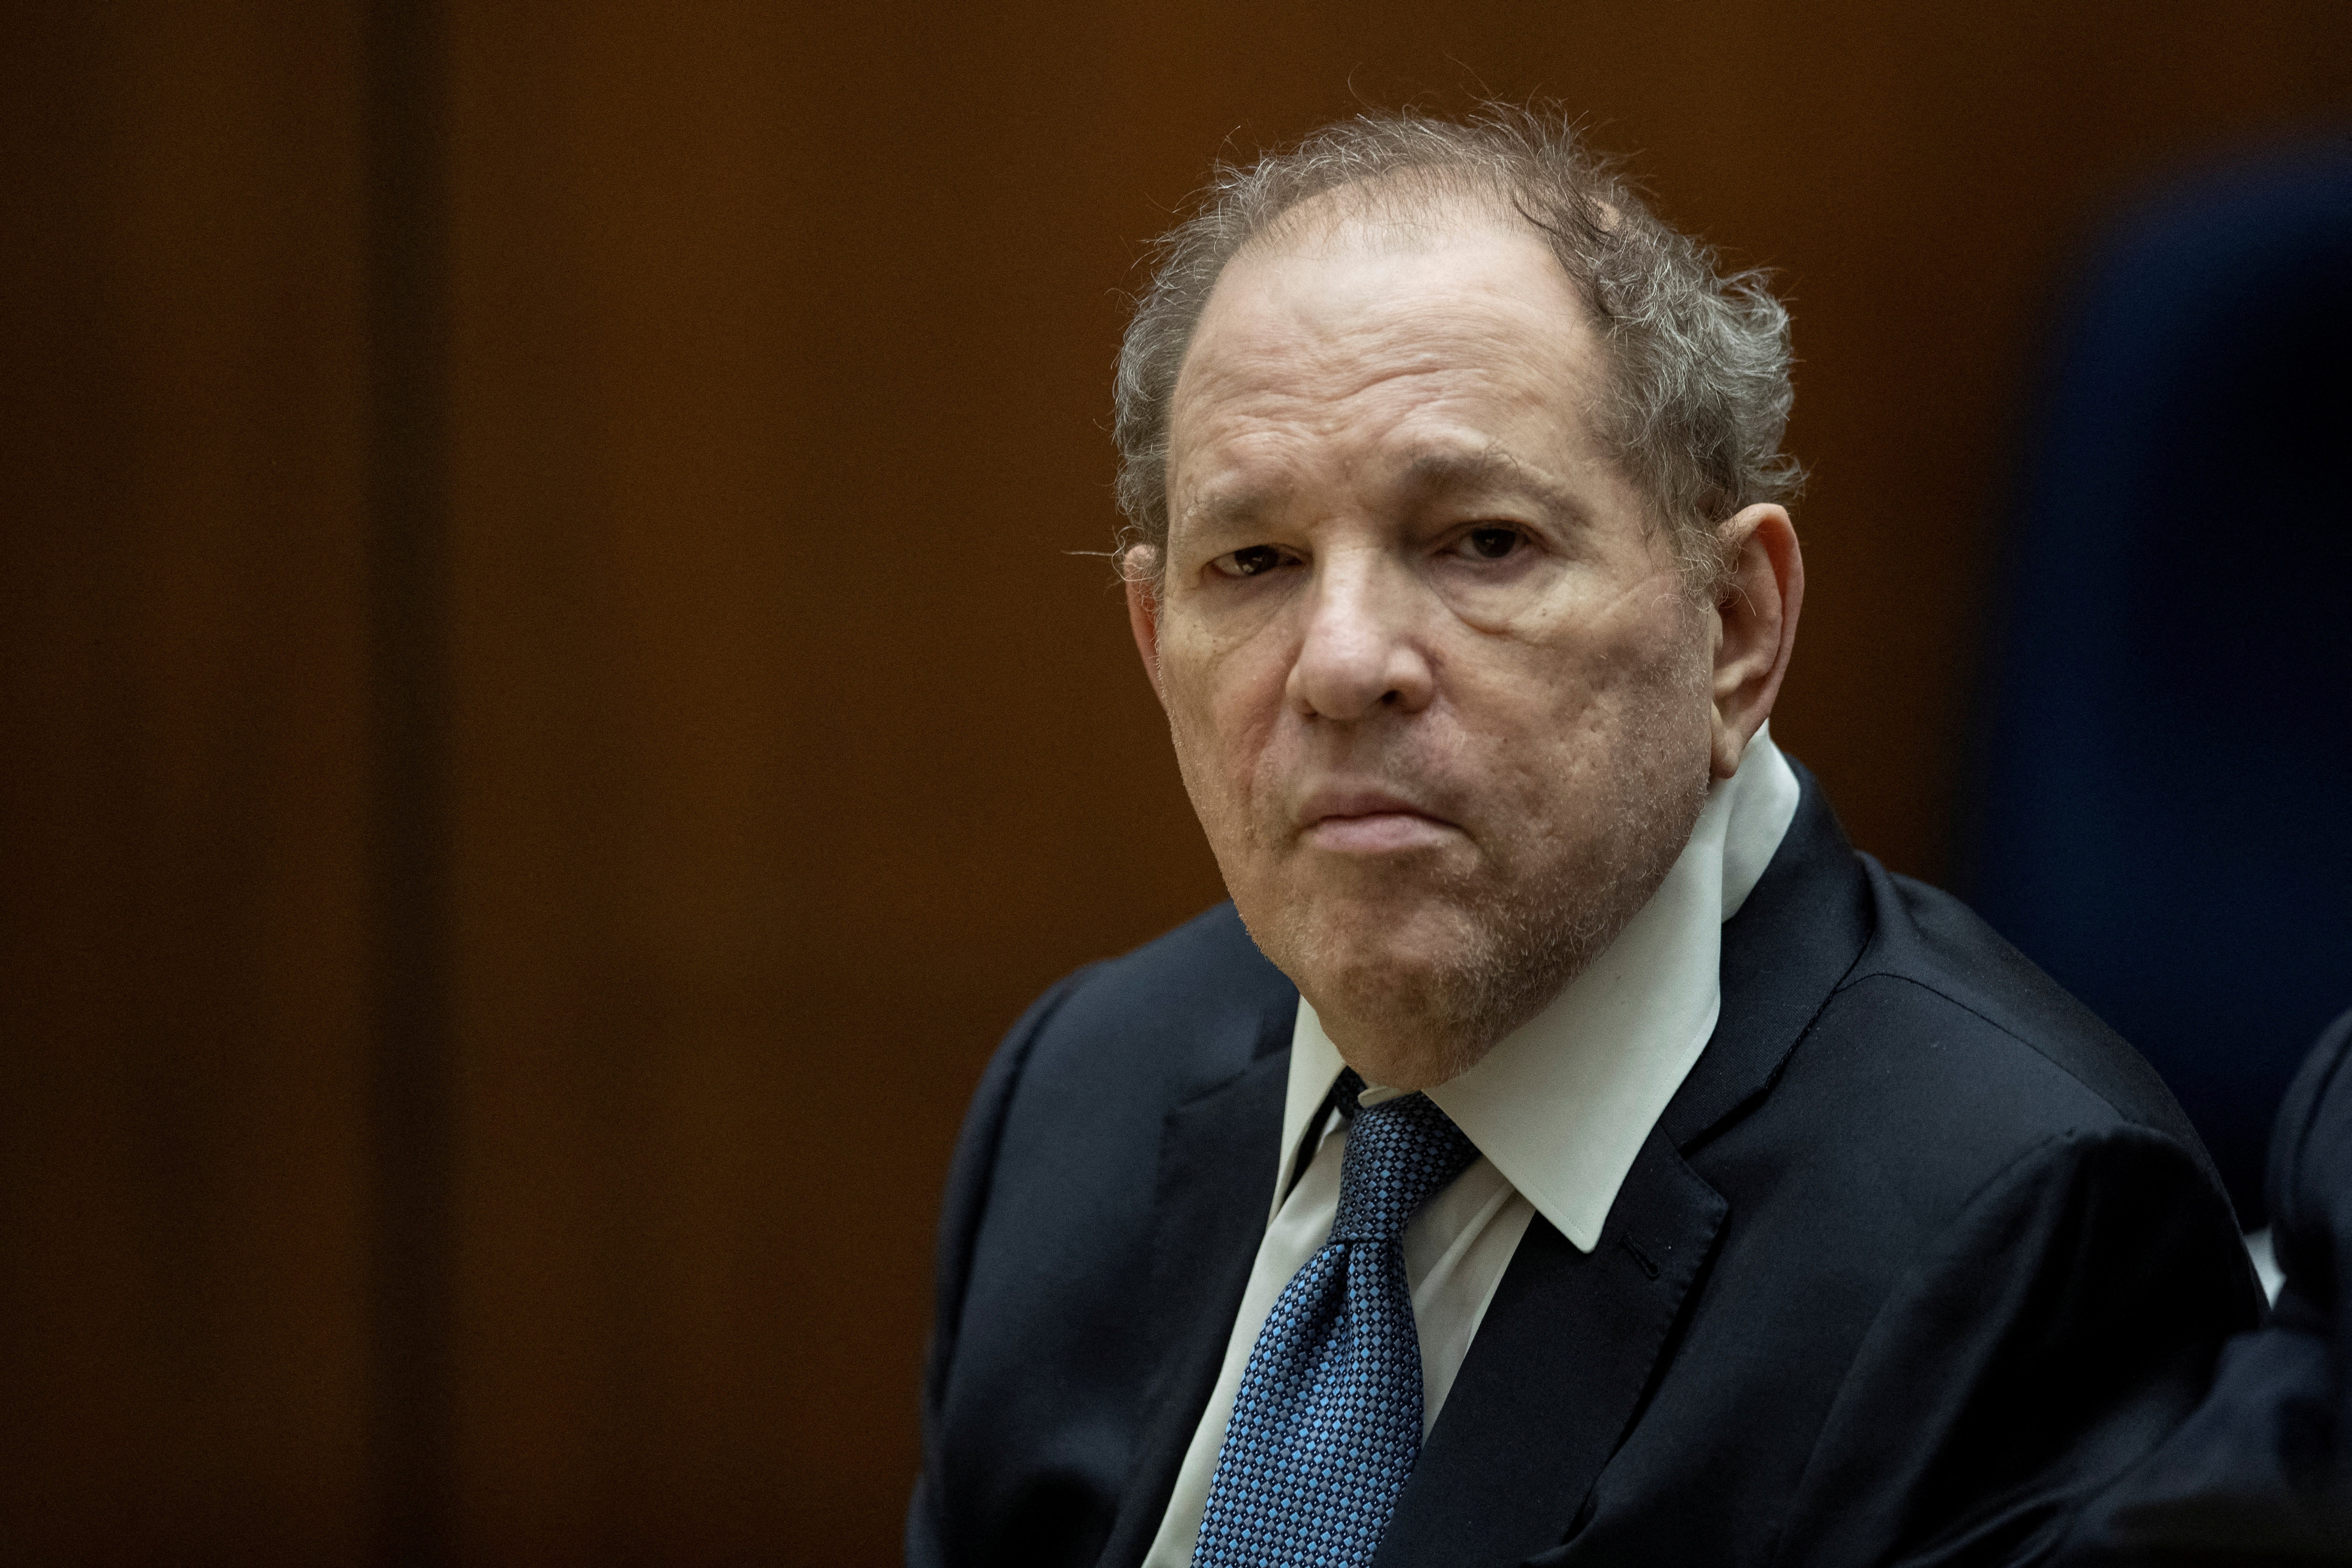 Former film producer Harvey Weinstein appears in court at the Clara Shortridge Foltz Criminal Justice Center in Los Angeles, California, USA, 04 October 2022